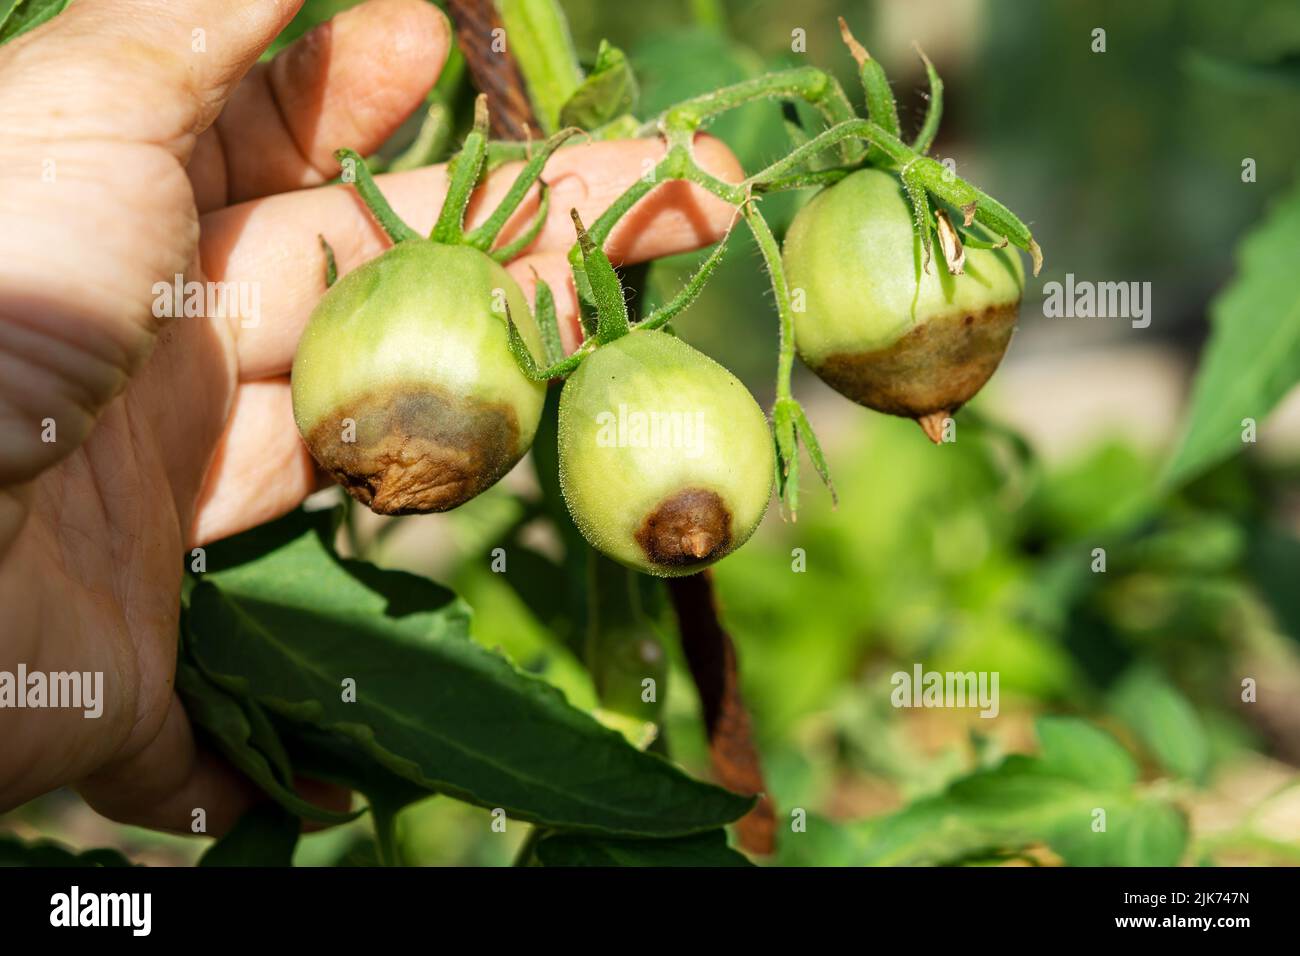 Tomato disease. Green tomatoes rot on a branch in a rural garden on a sunny day. Tomatoes are damaged and sick Stock Photo